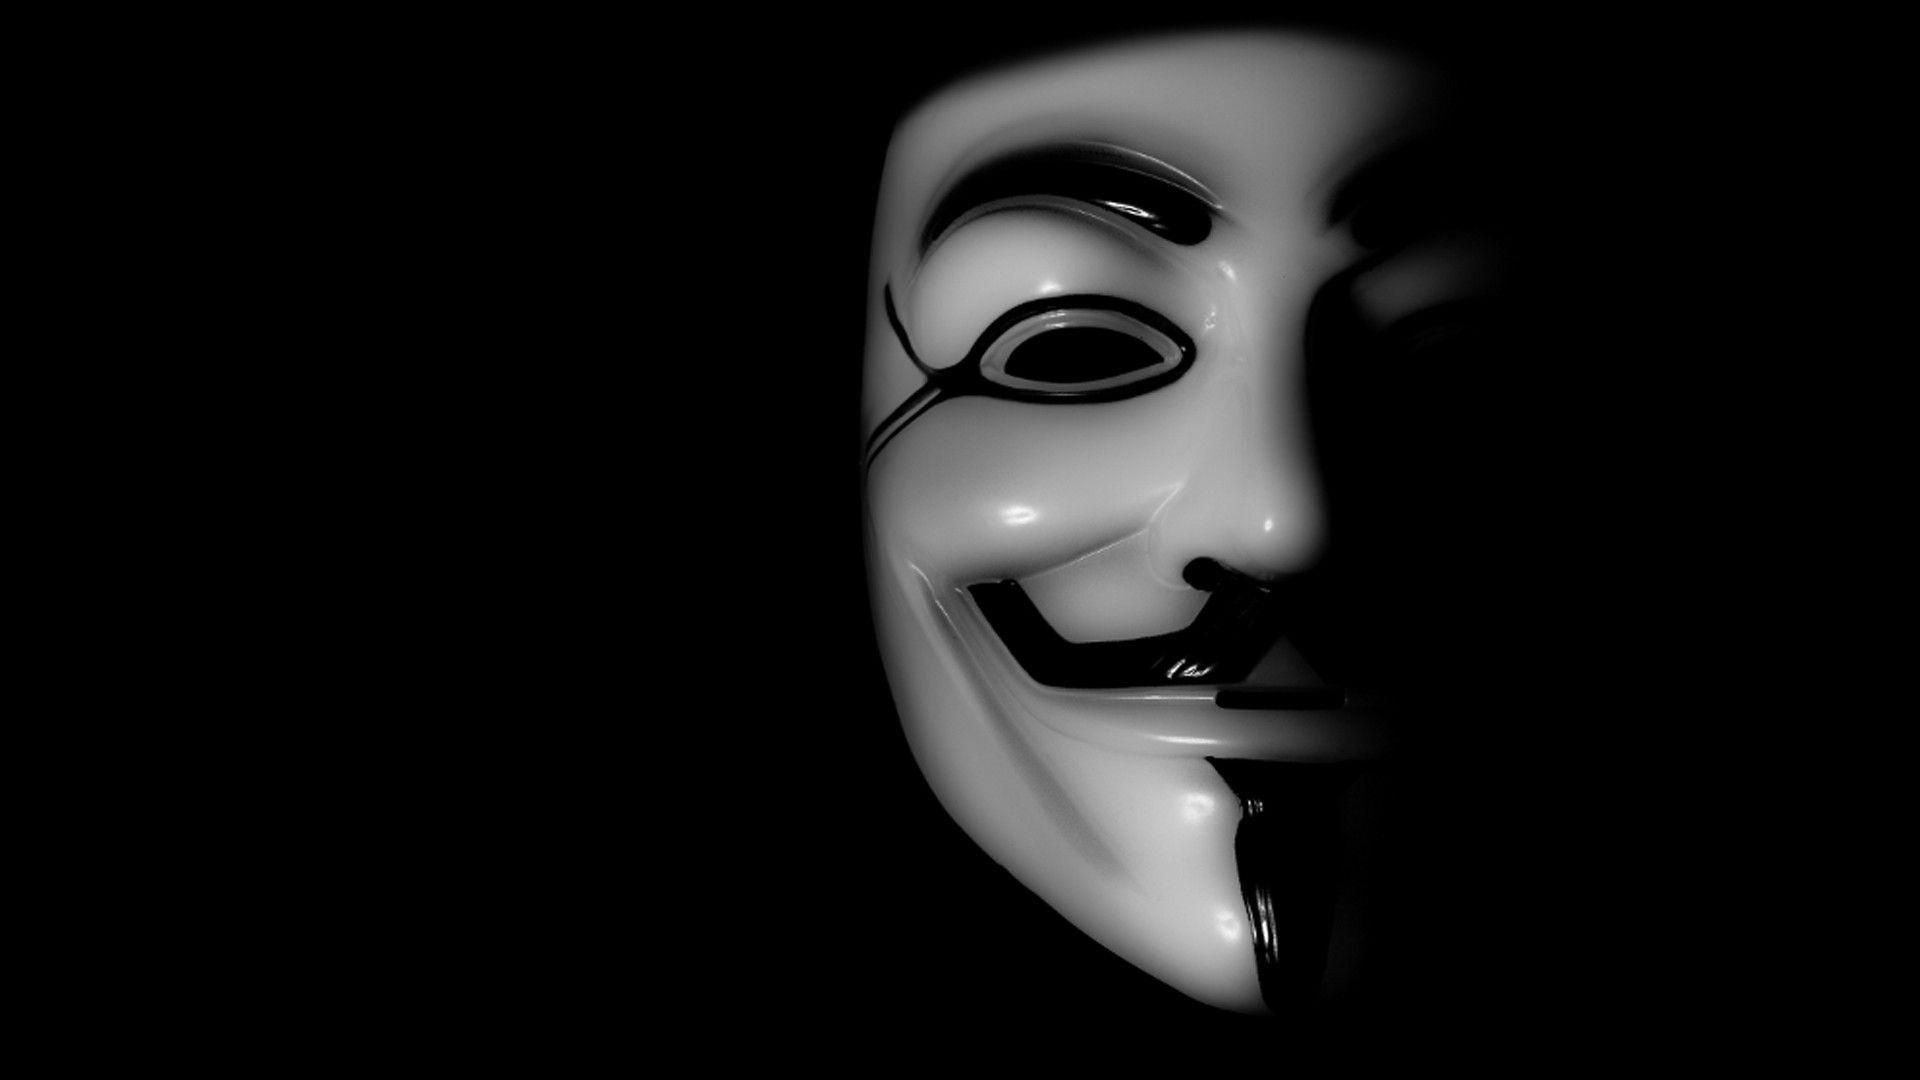 Guy Fawkes Mask: Has been used in protests against economic inequality and corporate greed. 1920x1080 Full HD Background.